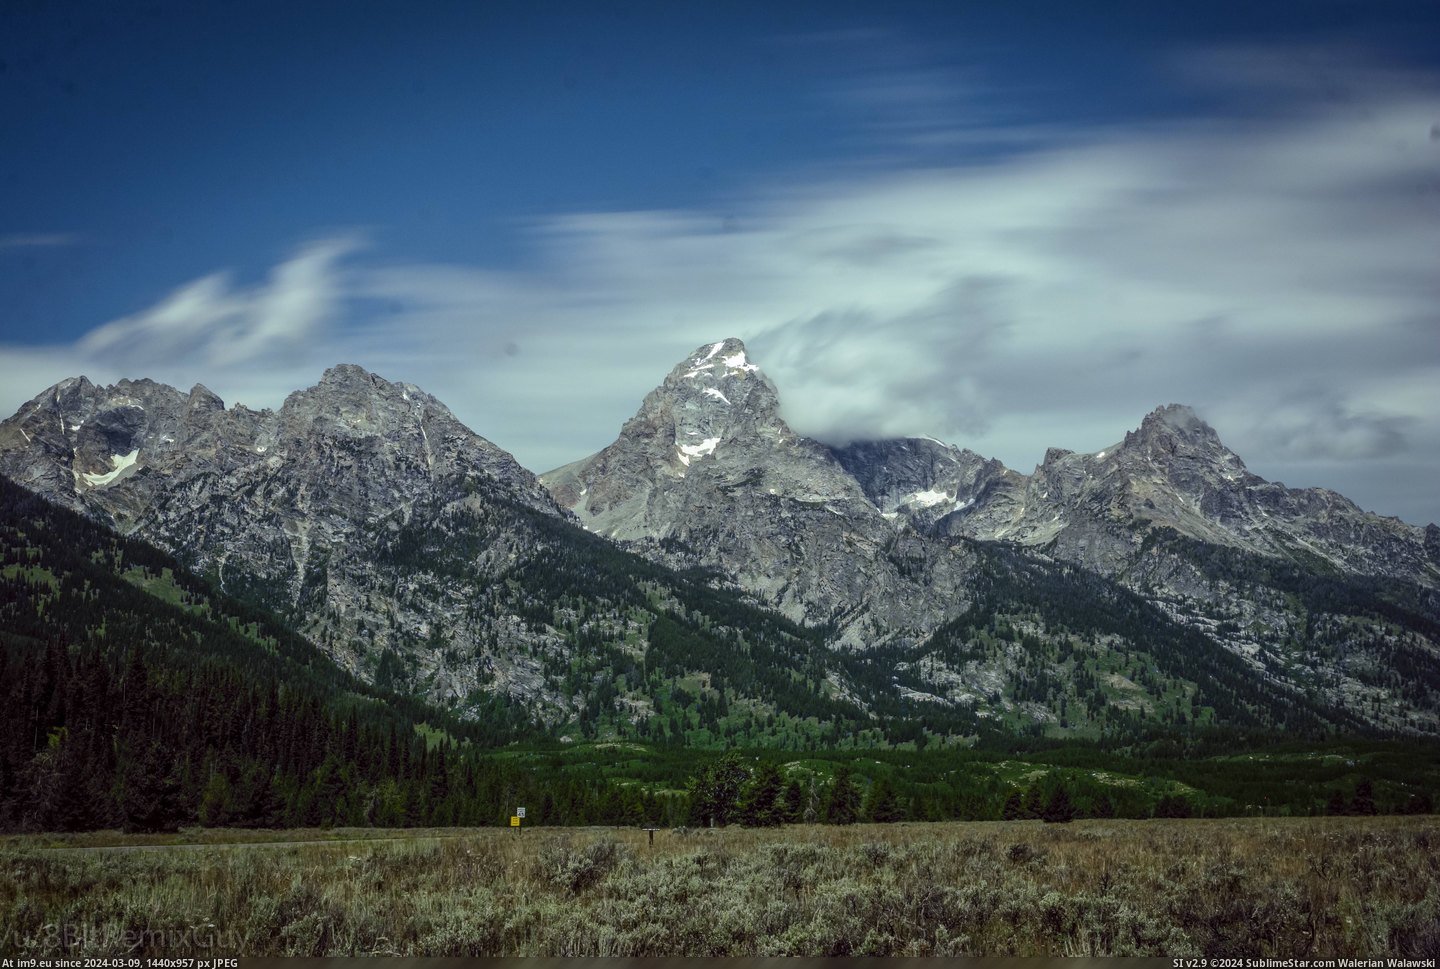 #Park #National #6000x4000 #Teton #Grand #Wyoming [Earthporn] Taken at Grand Teton National Park, in northwestern Wyoming. [6000x4000] Pic. (Image of album My r/EARTHPORN favs))